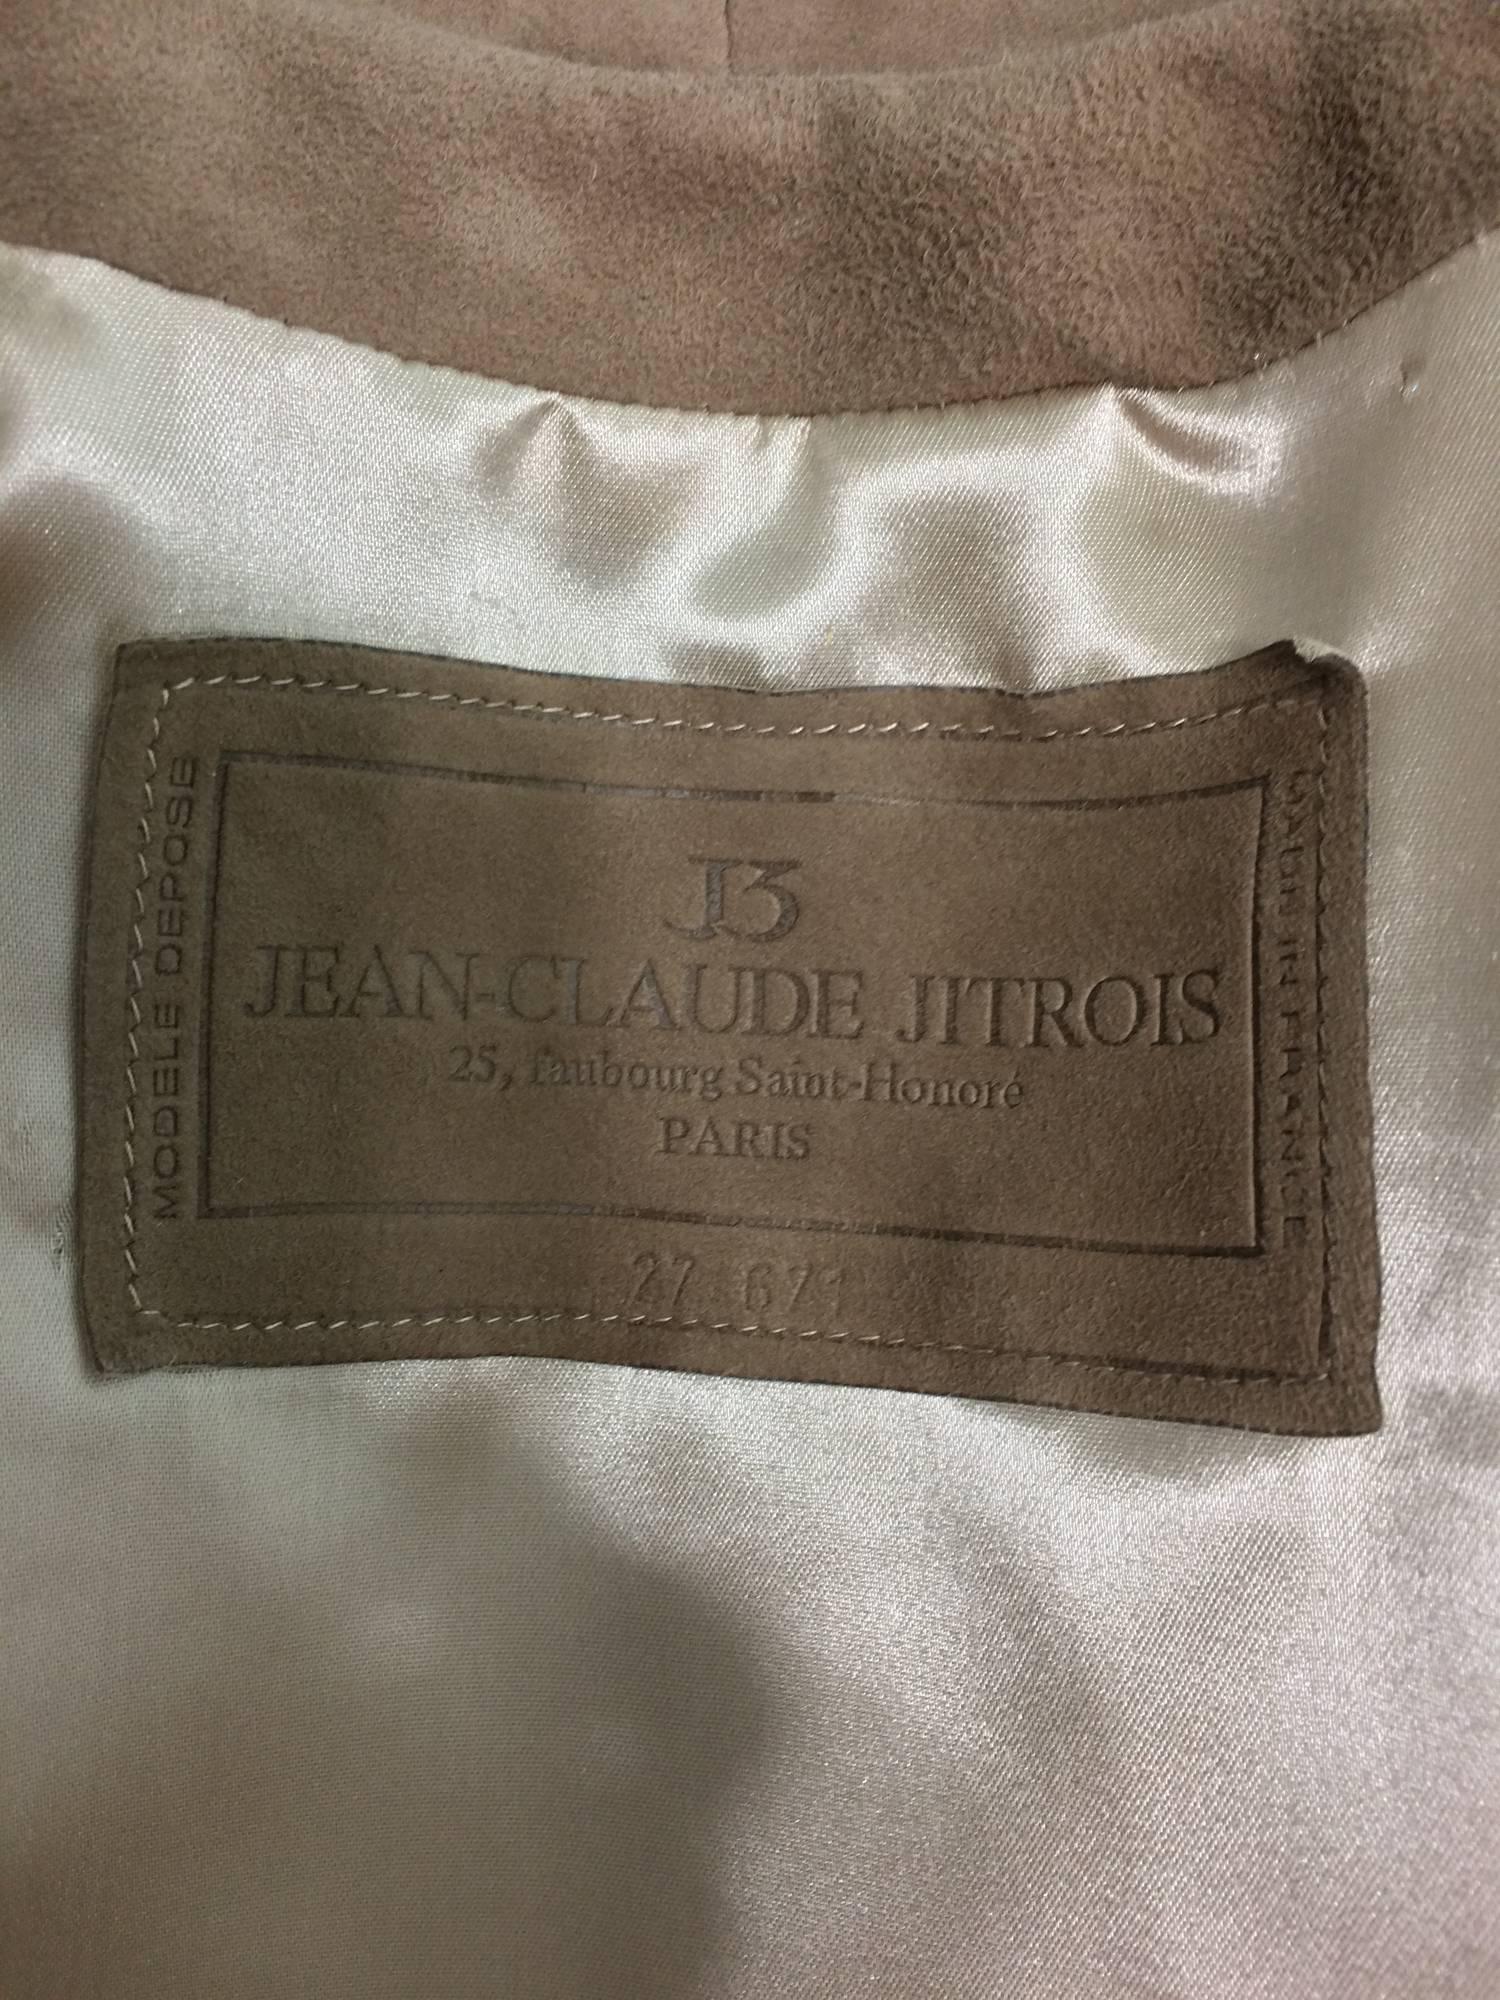 Jean-Claude Jitrois taupe suede cropped swing jacket 1980s For Sale 4